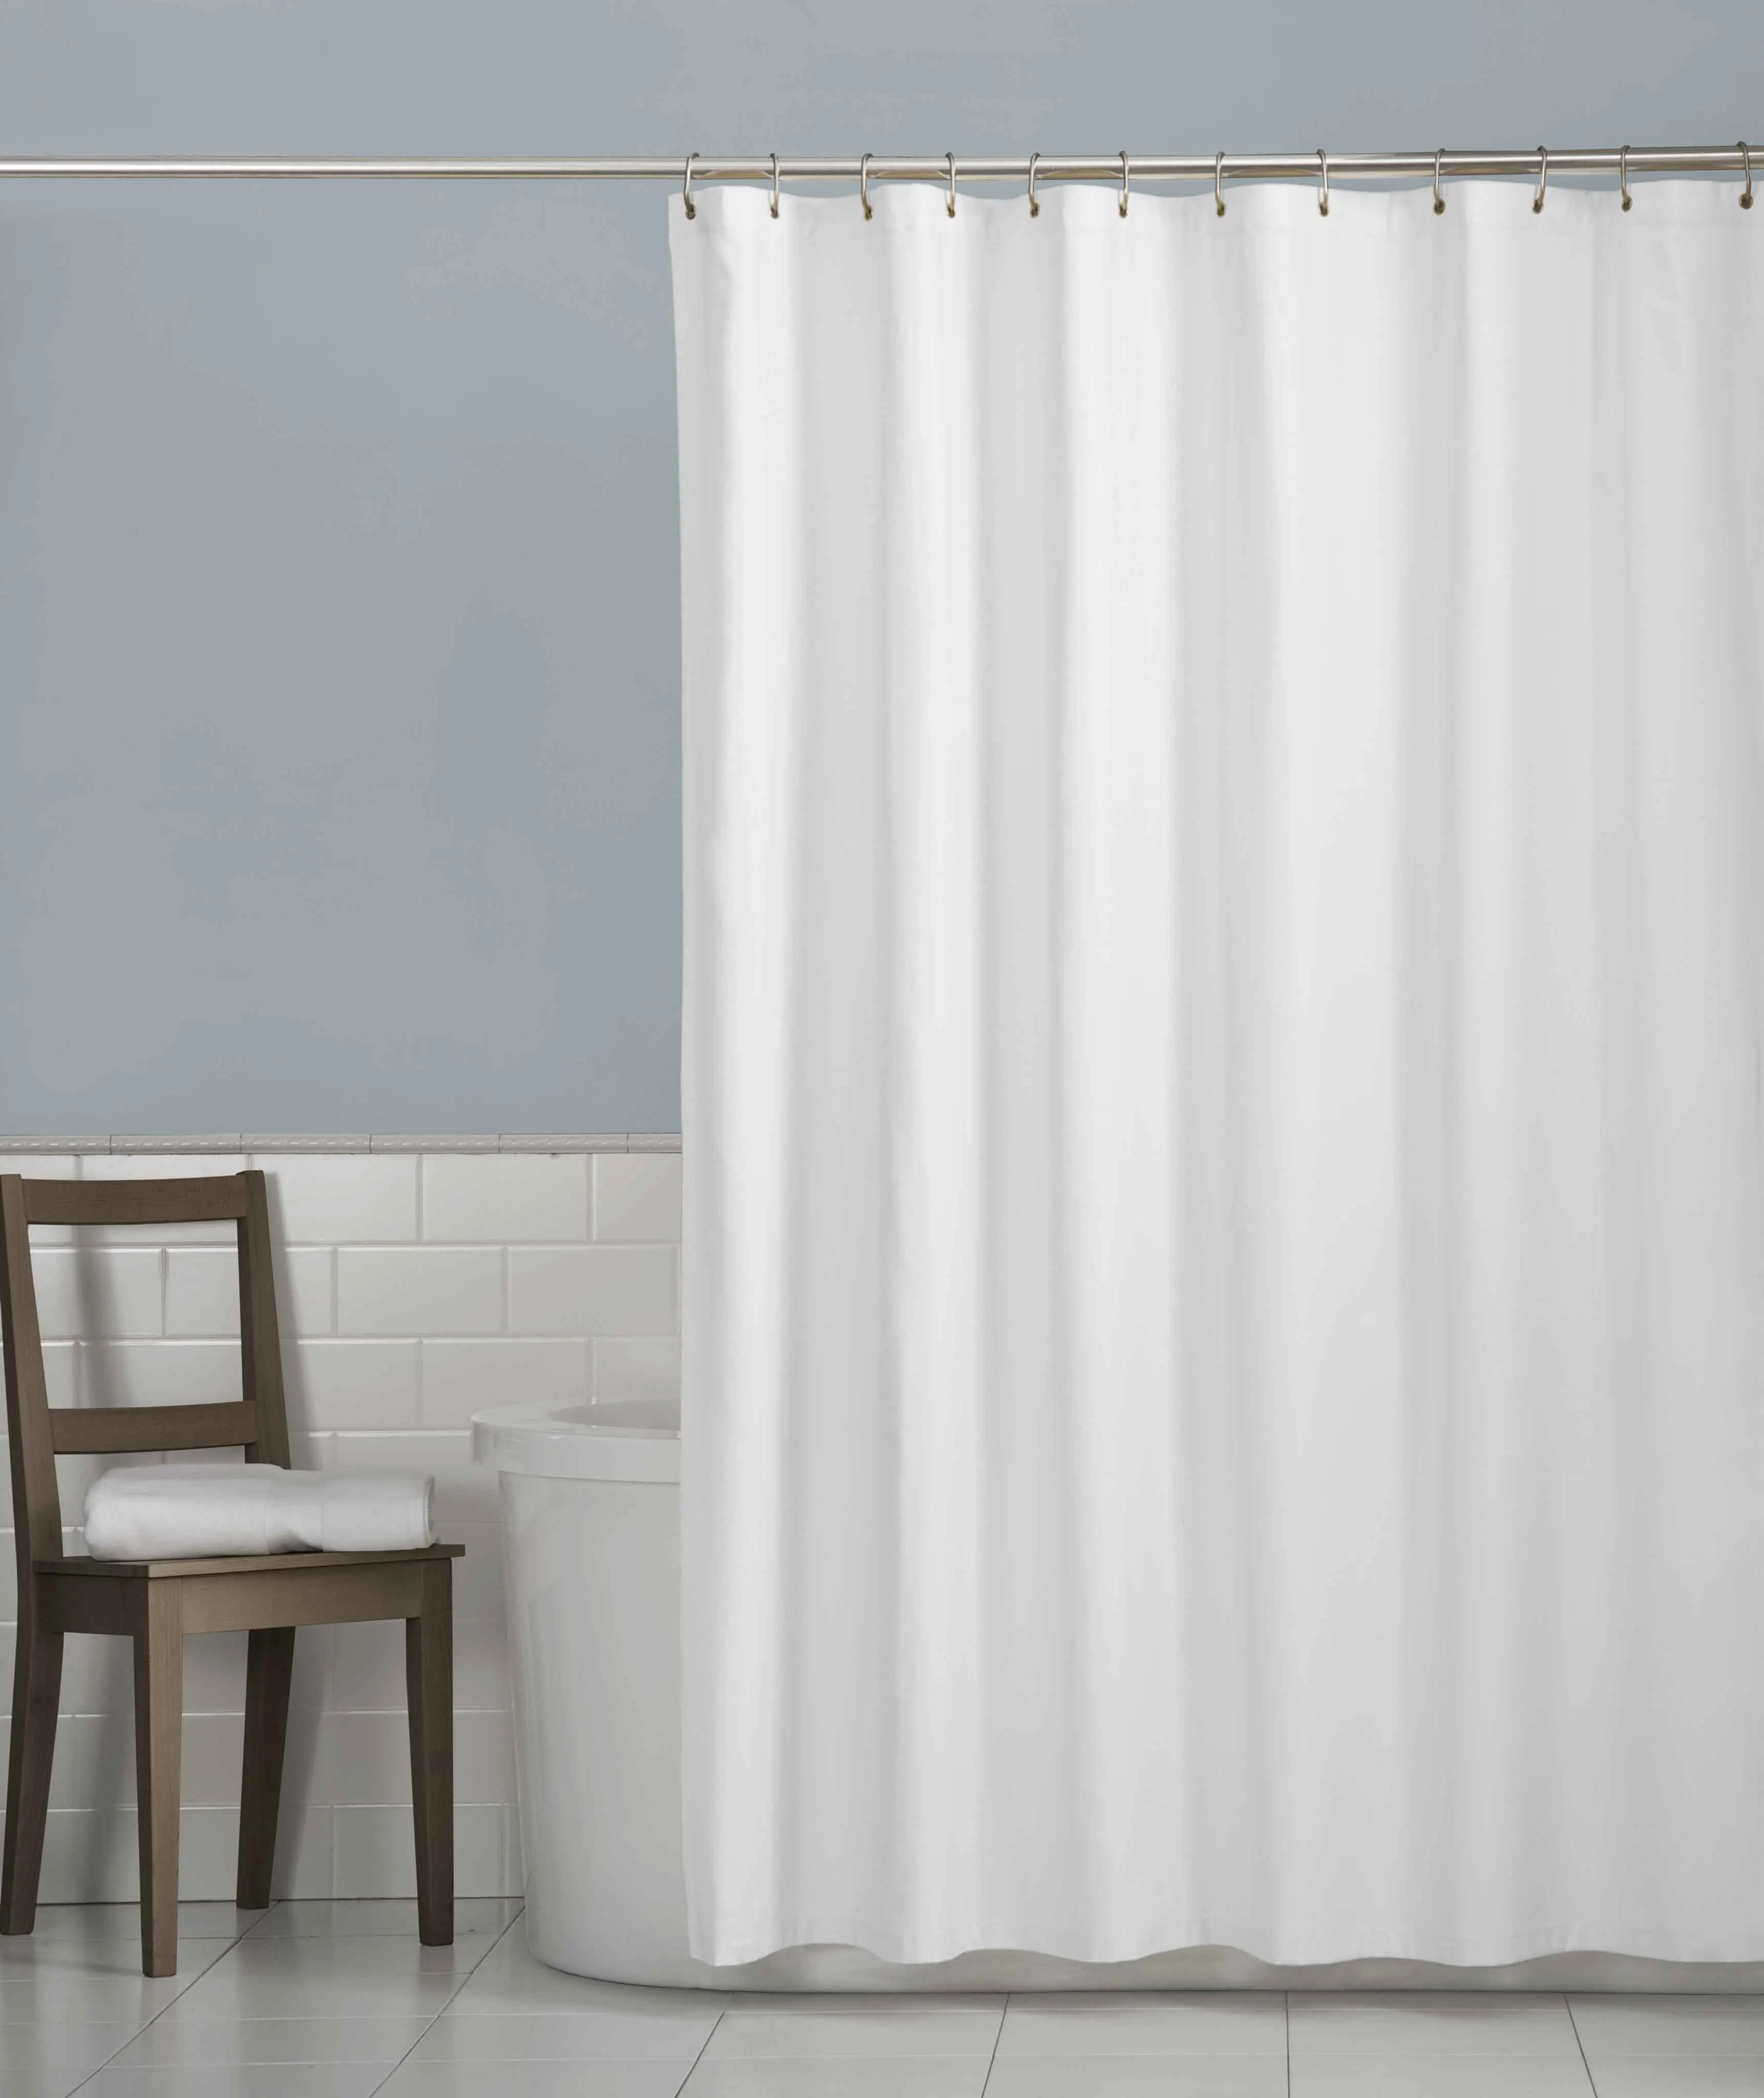 
Solid white pe shower curtain liner  (60495555085)